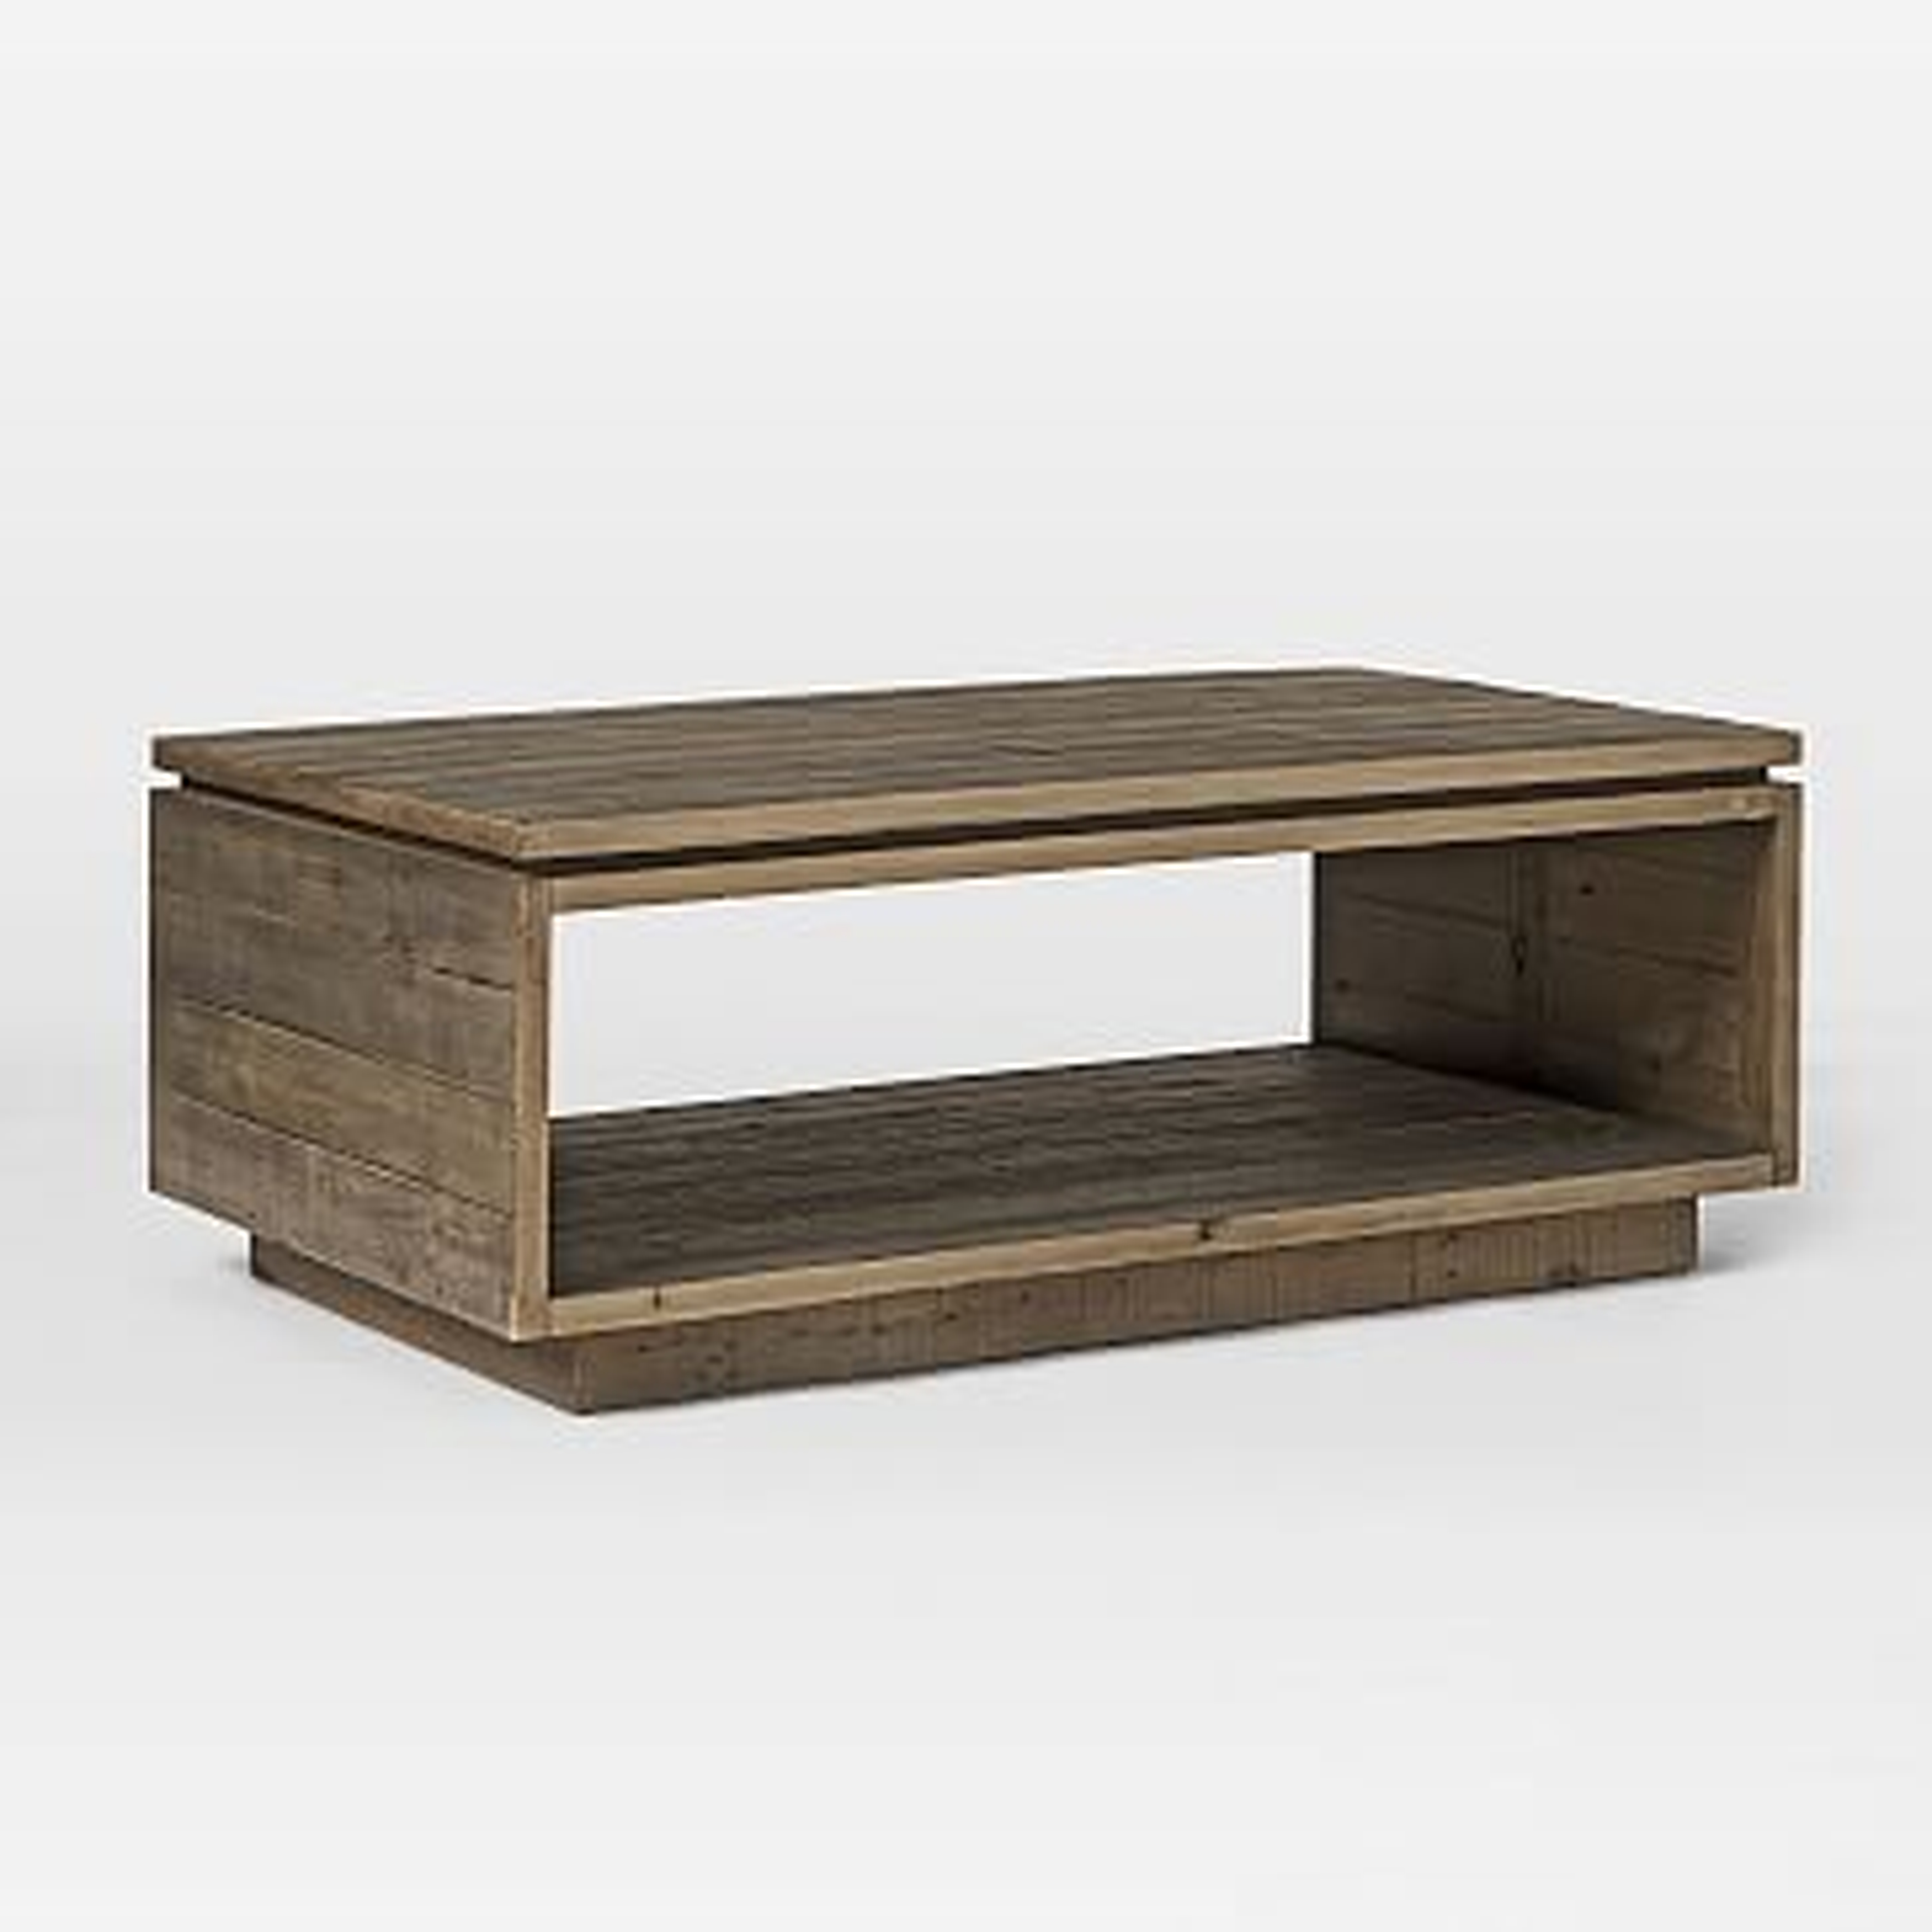 Emmerson(R) Modern Coffee Table, Reclaimed Pine - West Elm